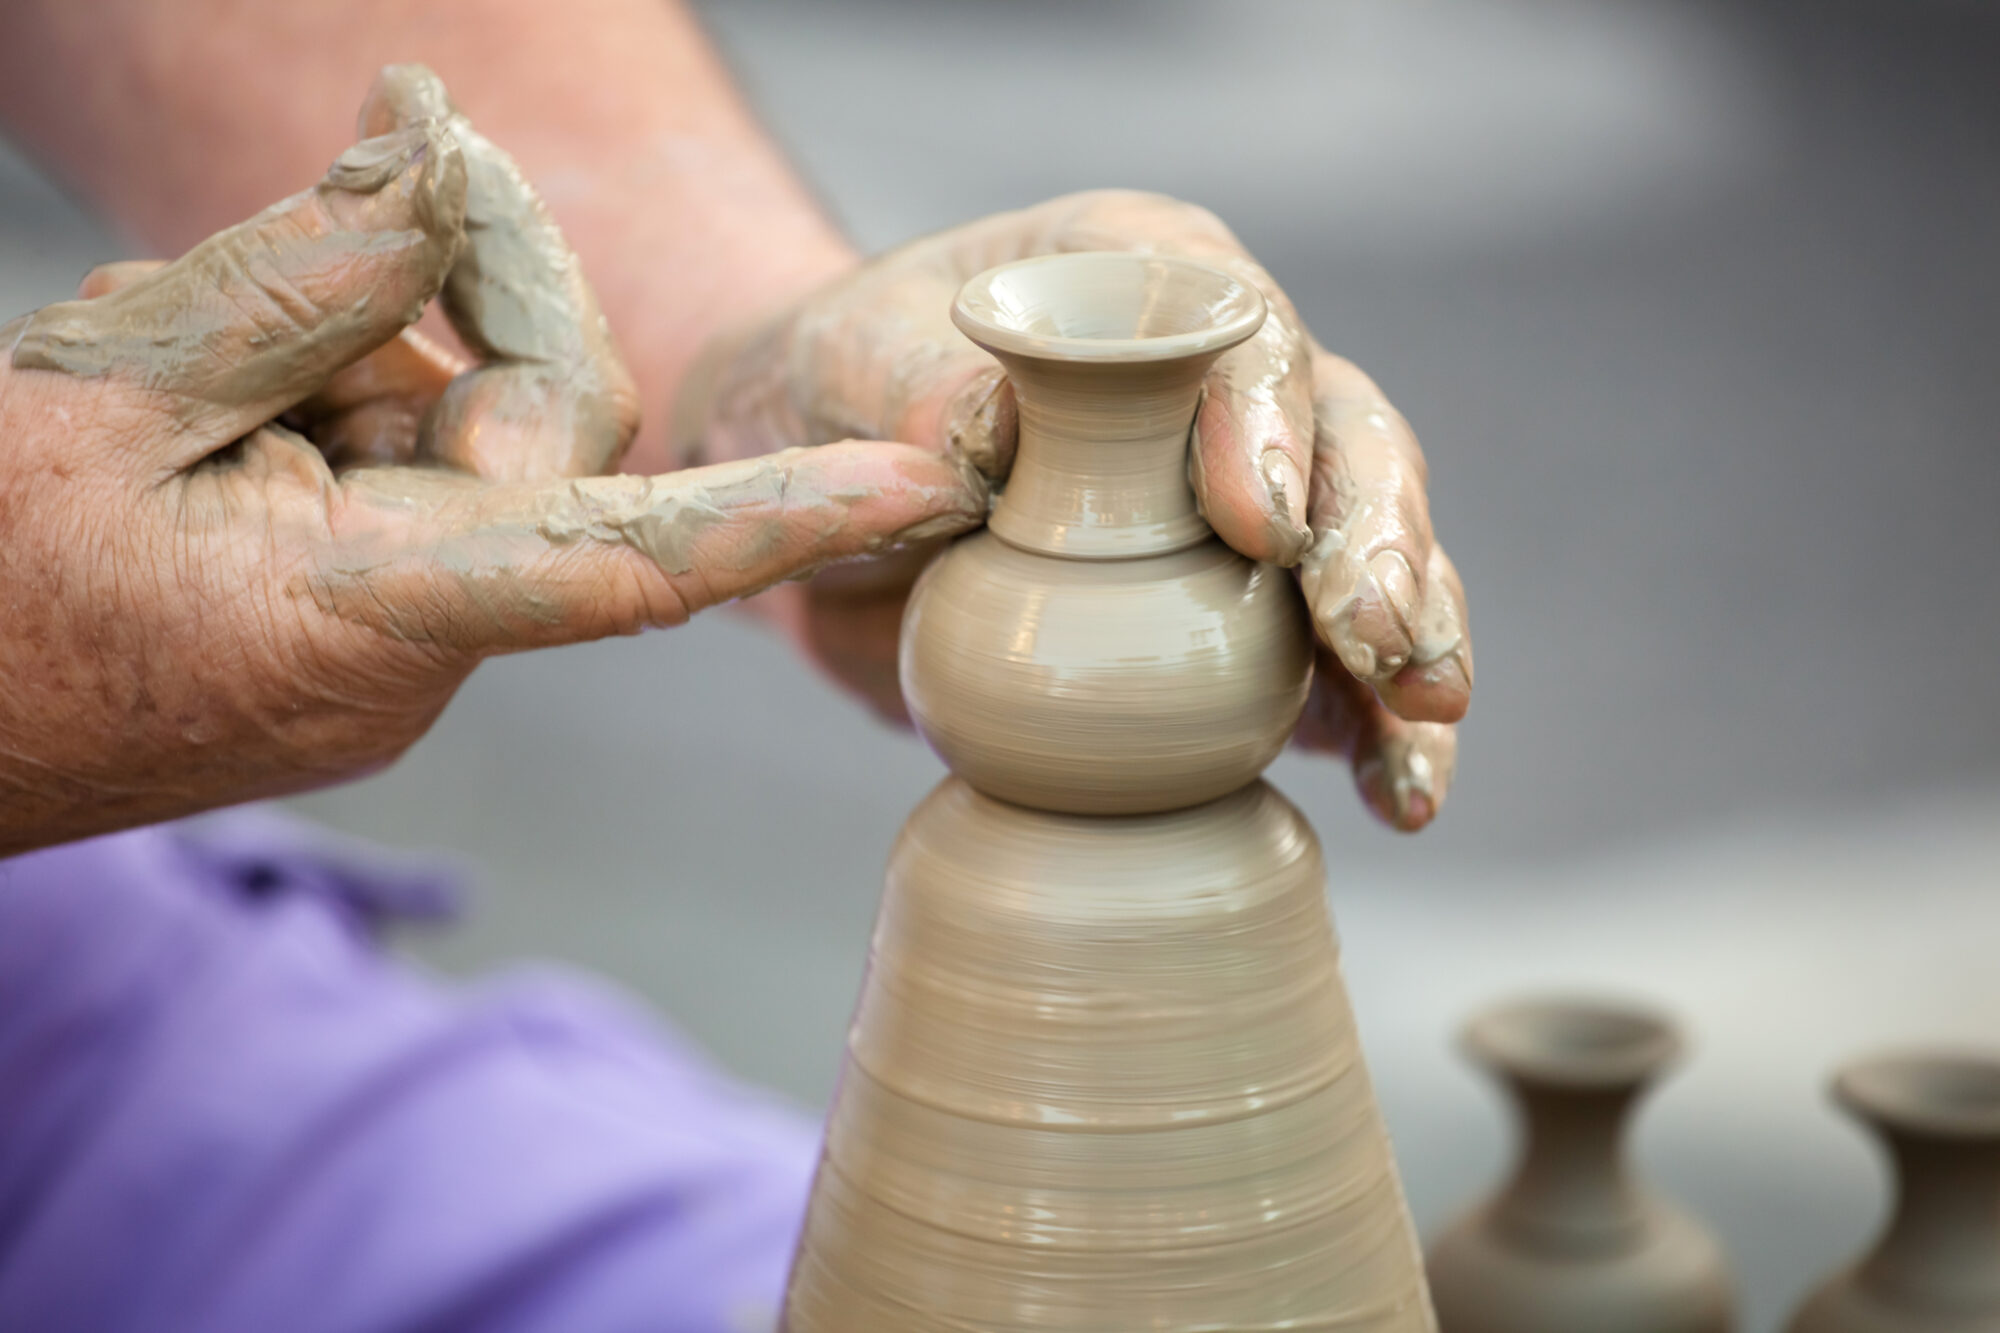 Image of pottery on a wheel to illustrate videoSEO in a blog